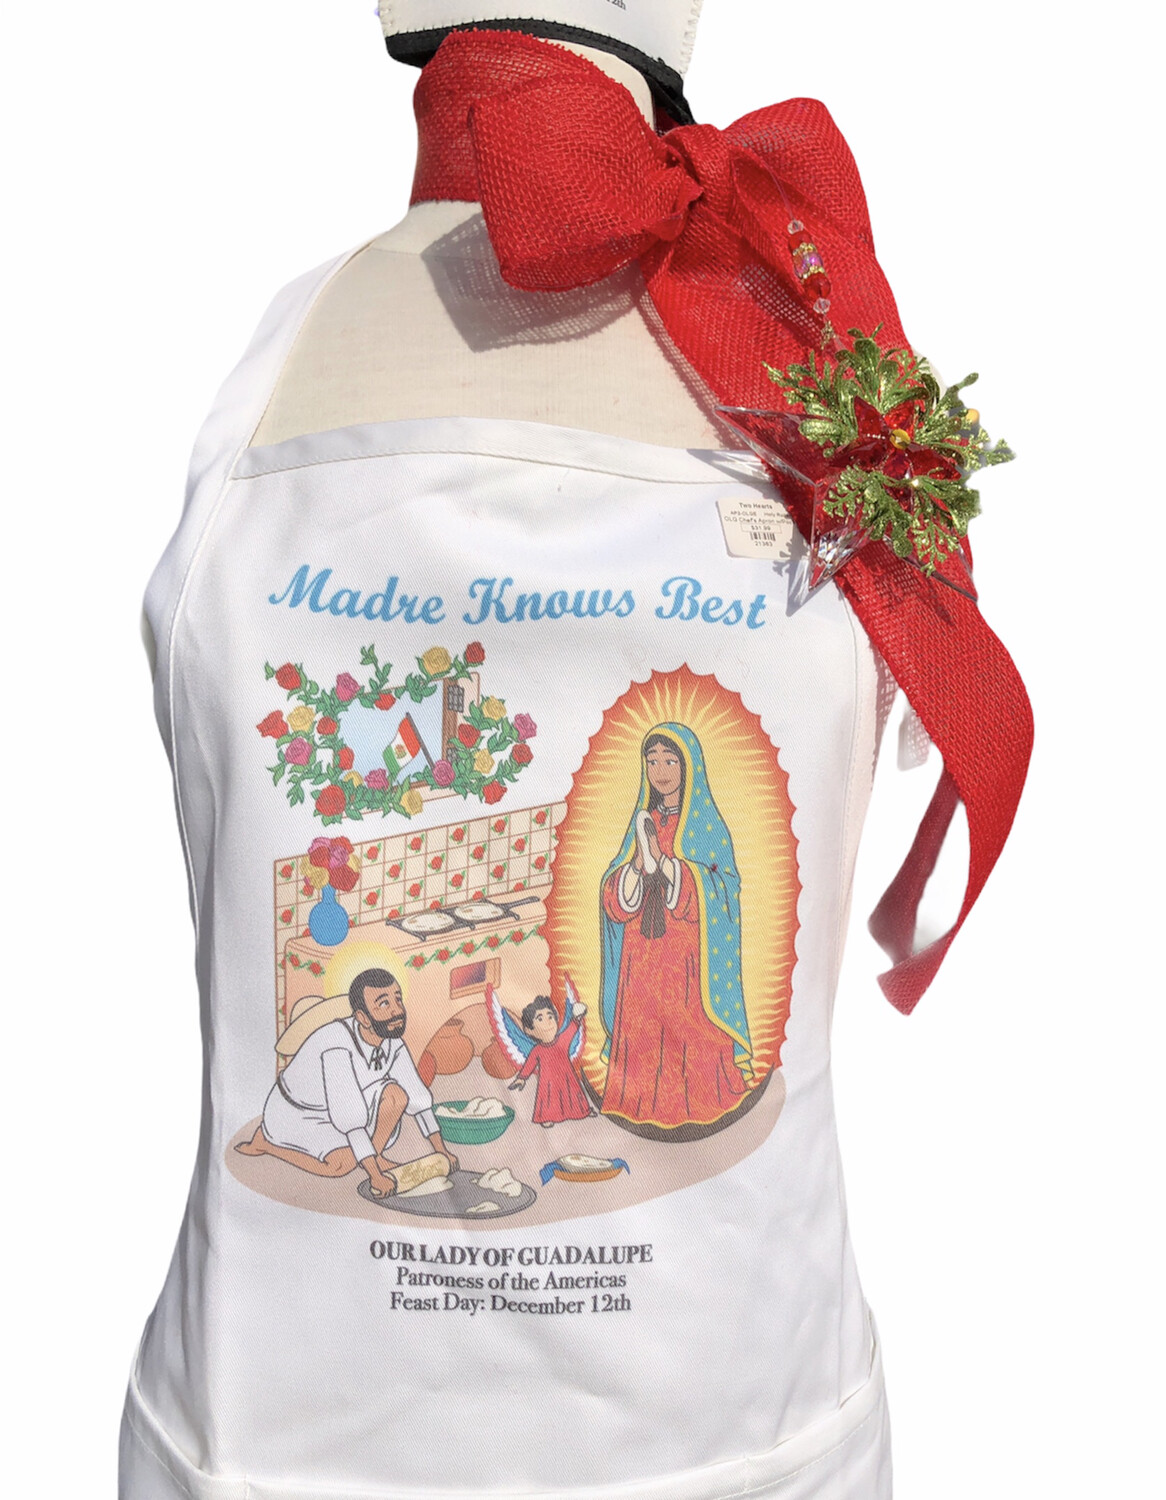 Madre Knows Best/Our Lady Of Guadalupe Chef’s Apron